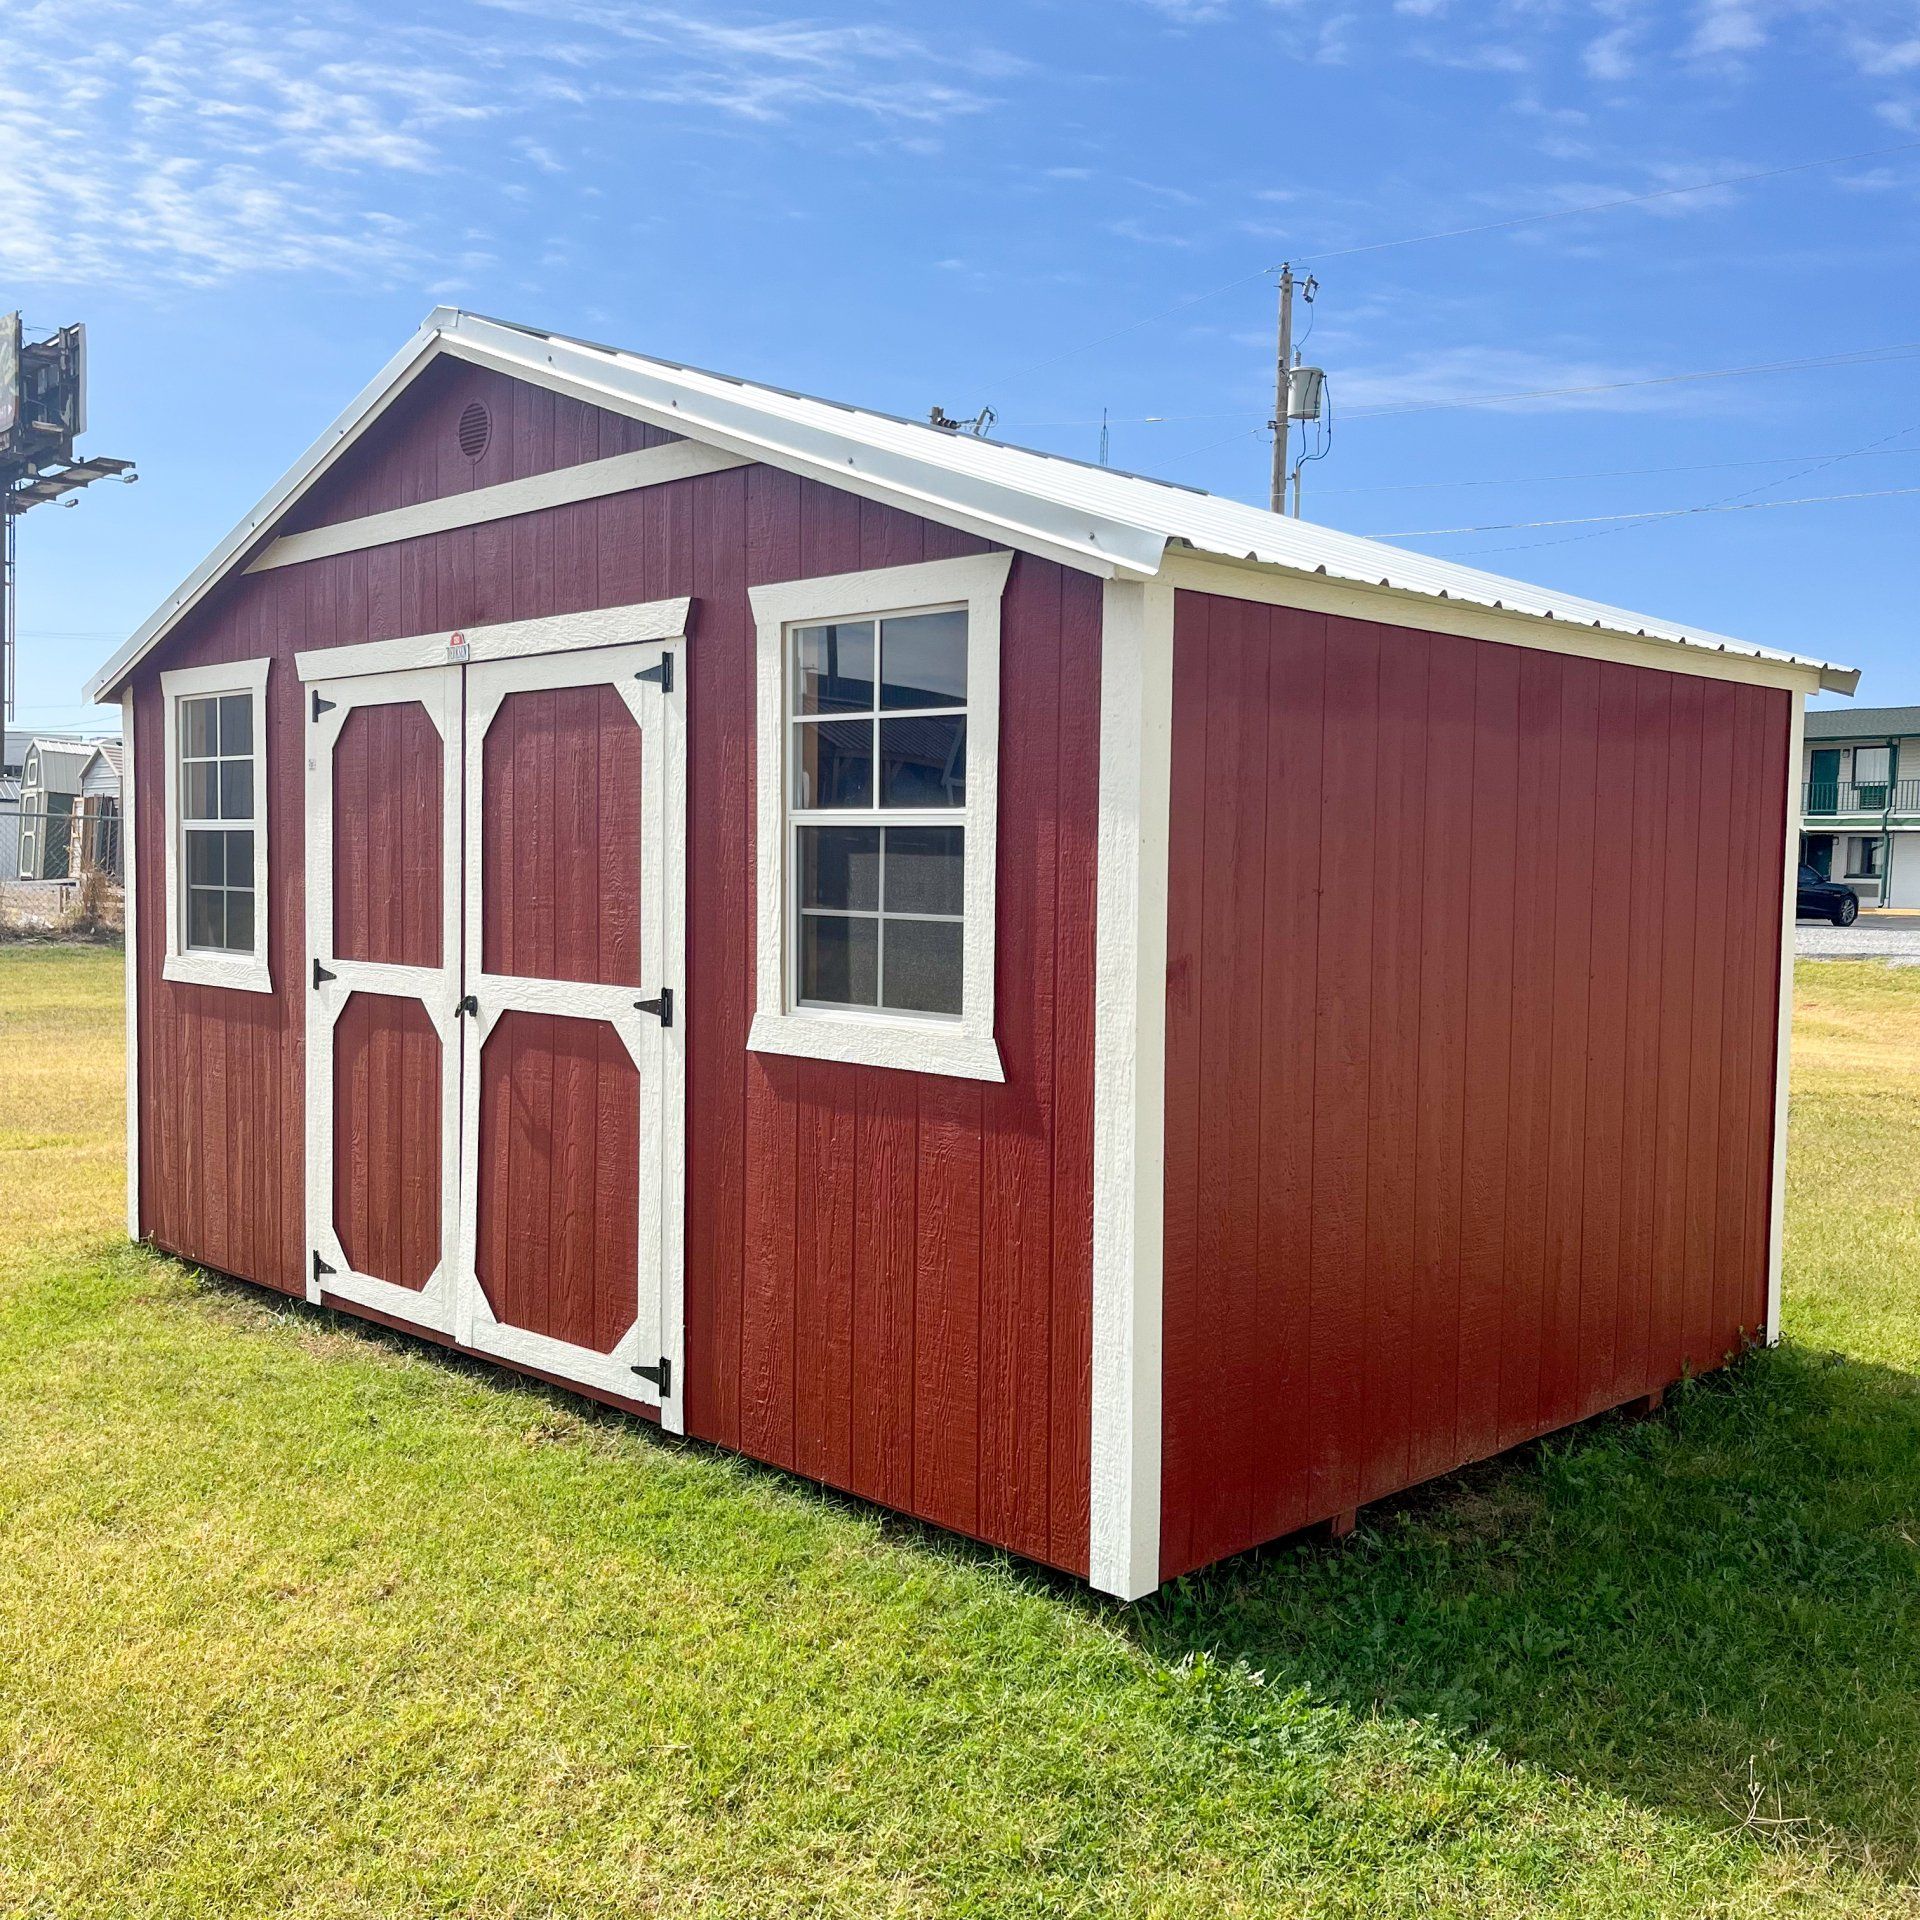 a red shed with white trim is sitting in the grass